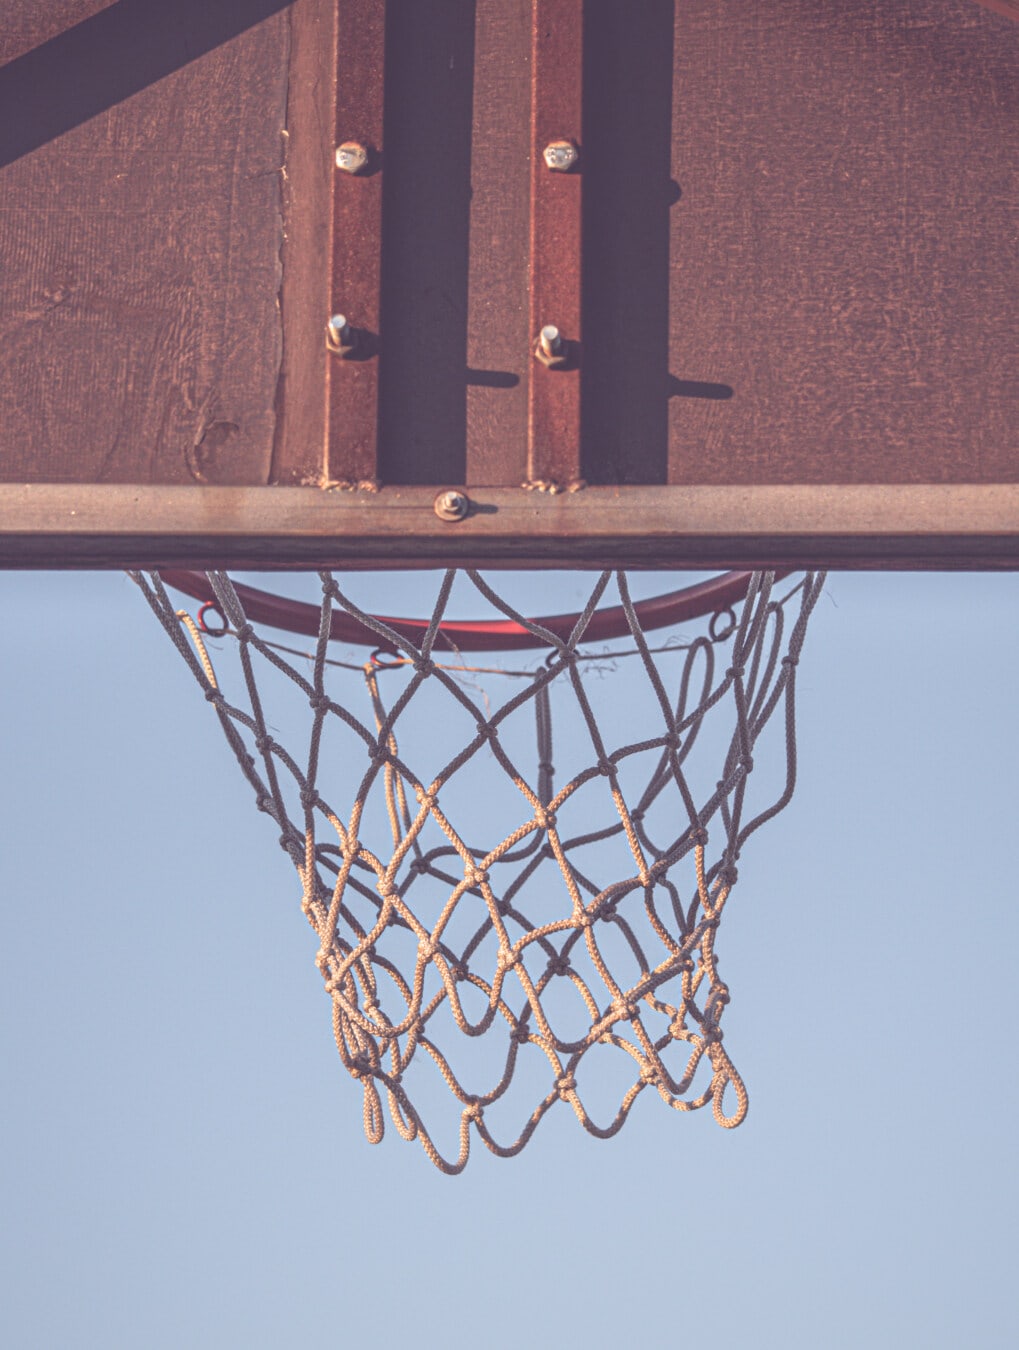 basketball, basketball court, sport, high, outdoors, old, hanging, metal, outdoor, object